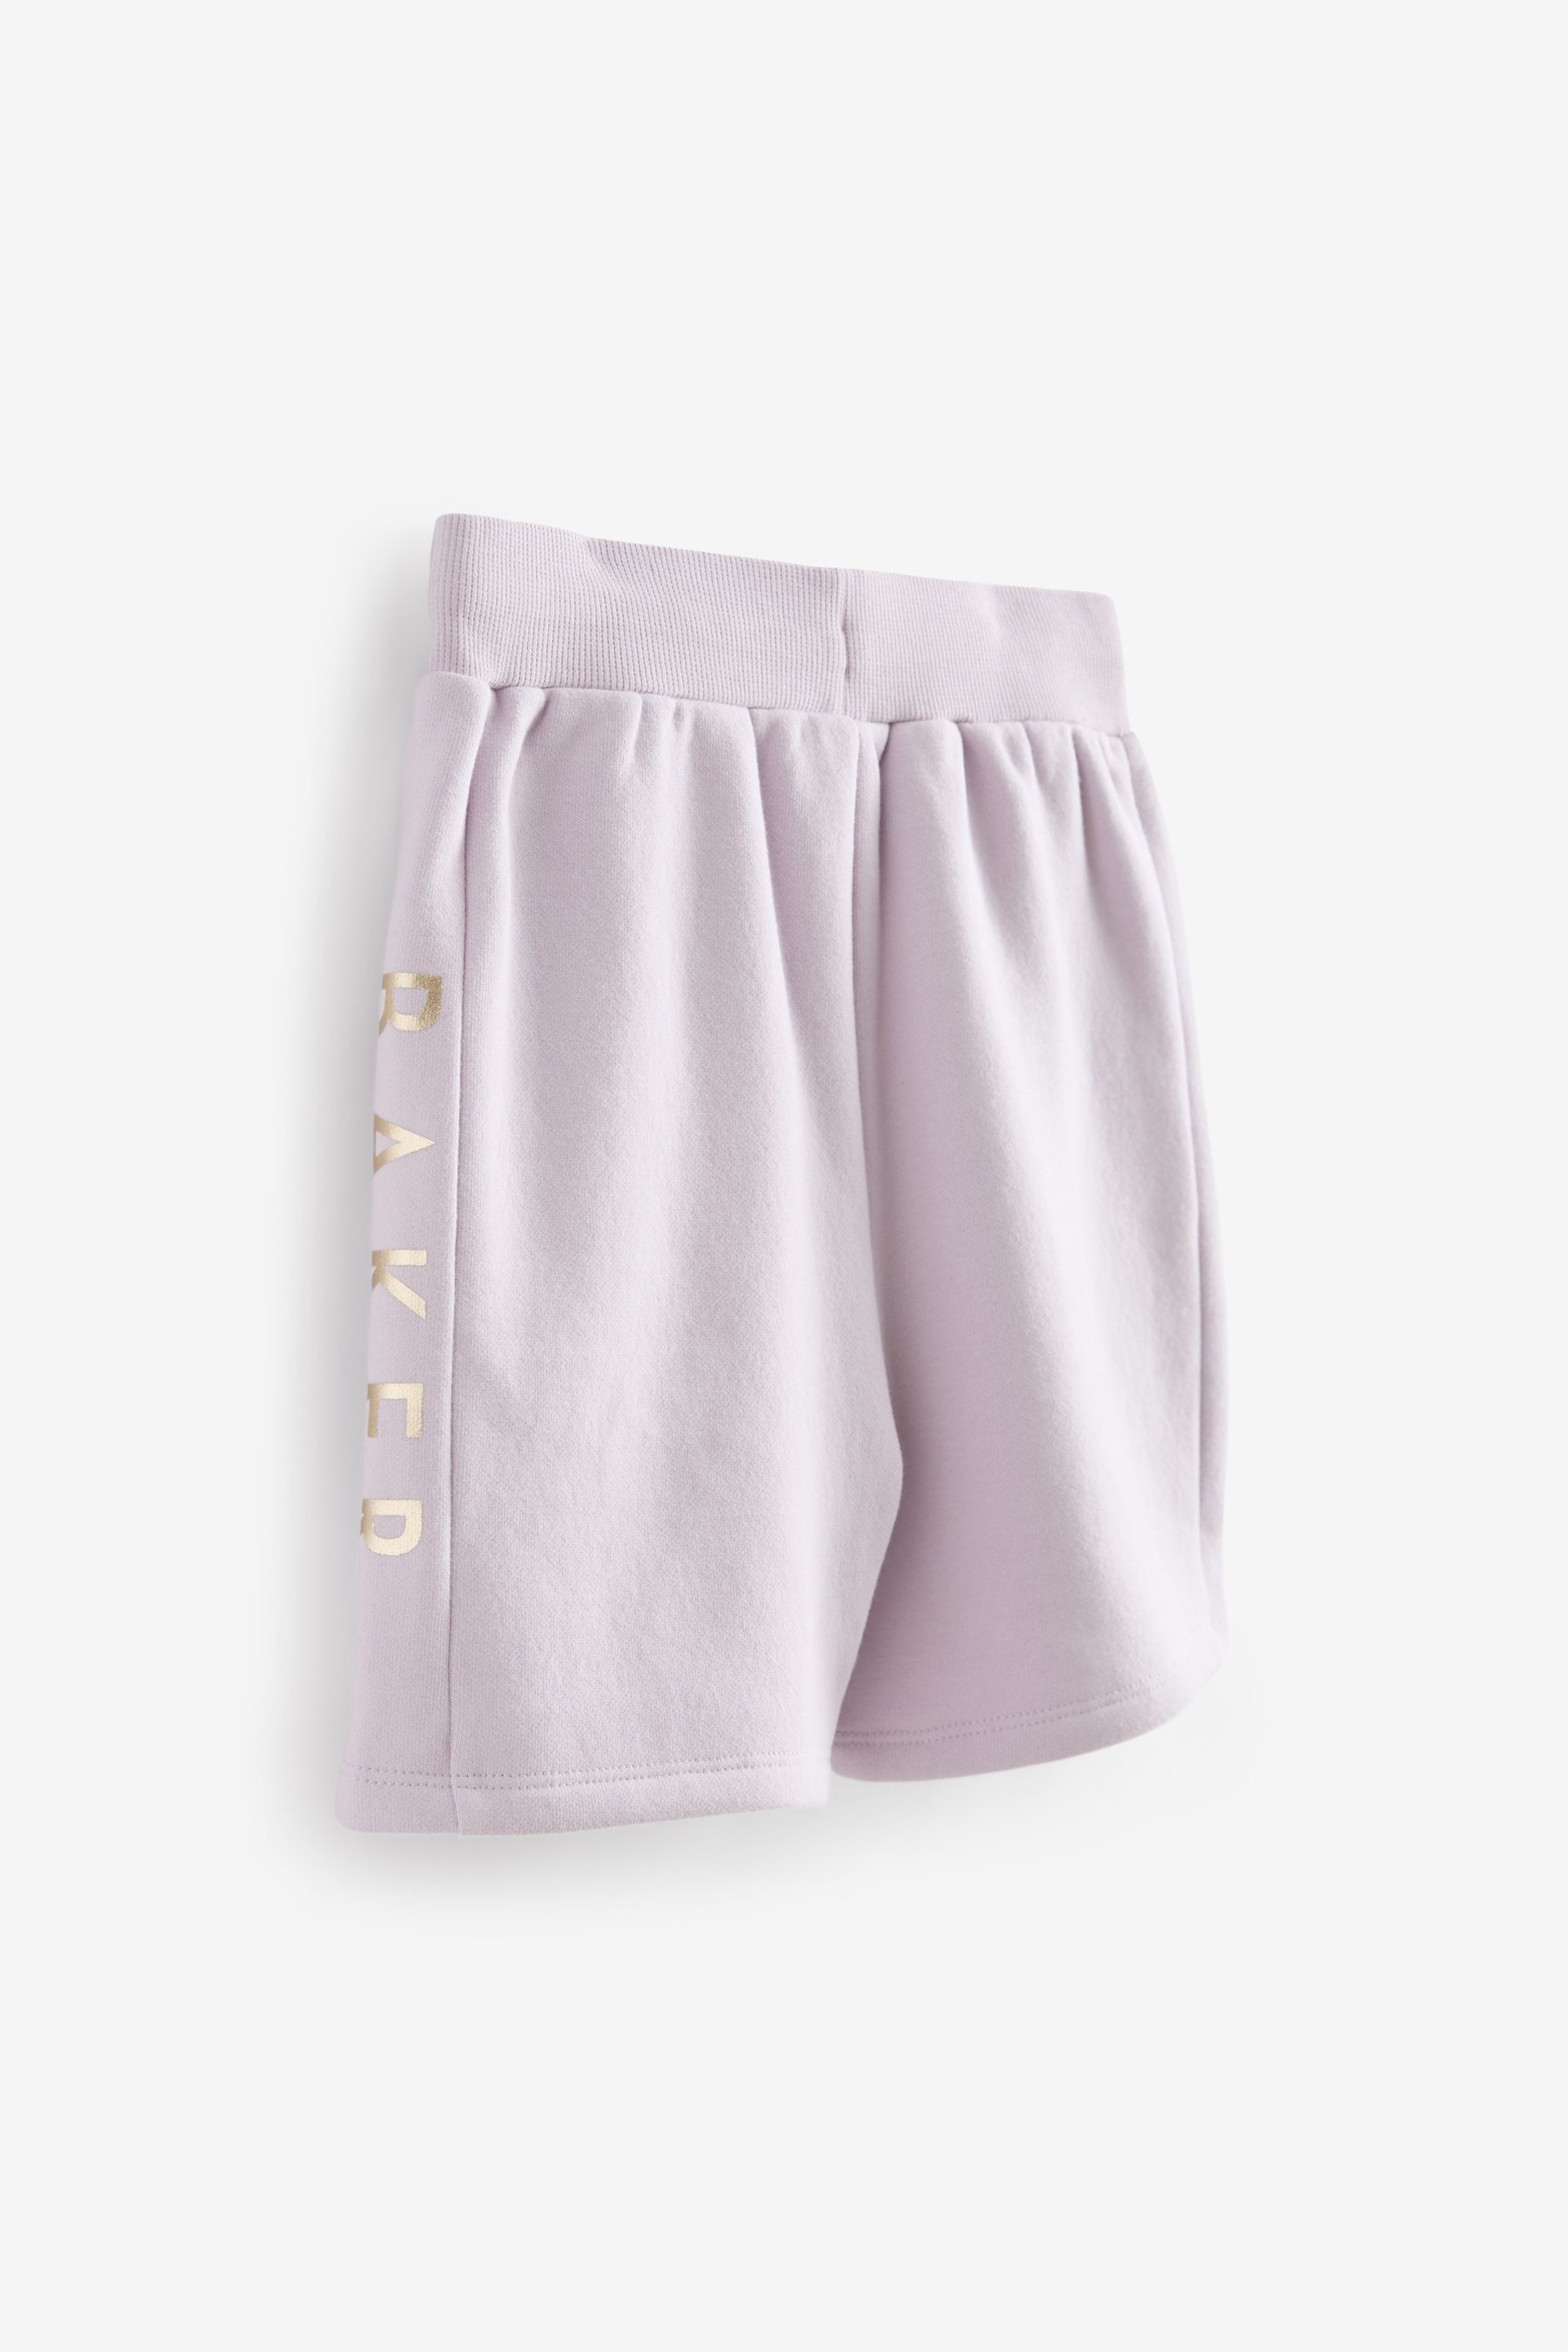 Baker by Ted Baker Lilac Purple Frilled T-Shirt and Short Set - Image 8 of 10